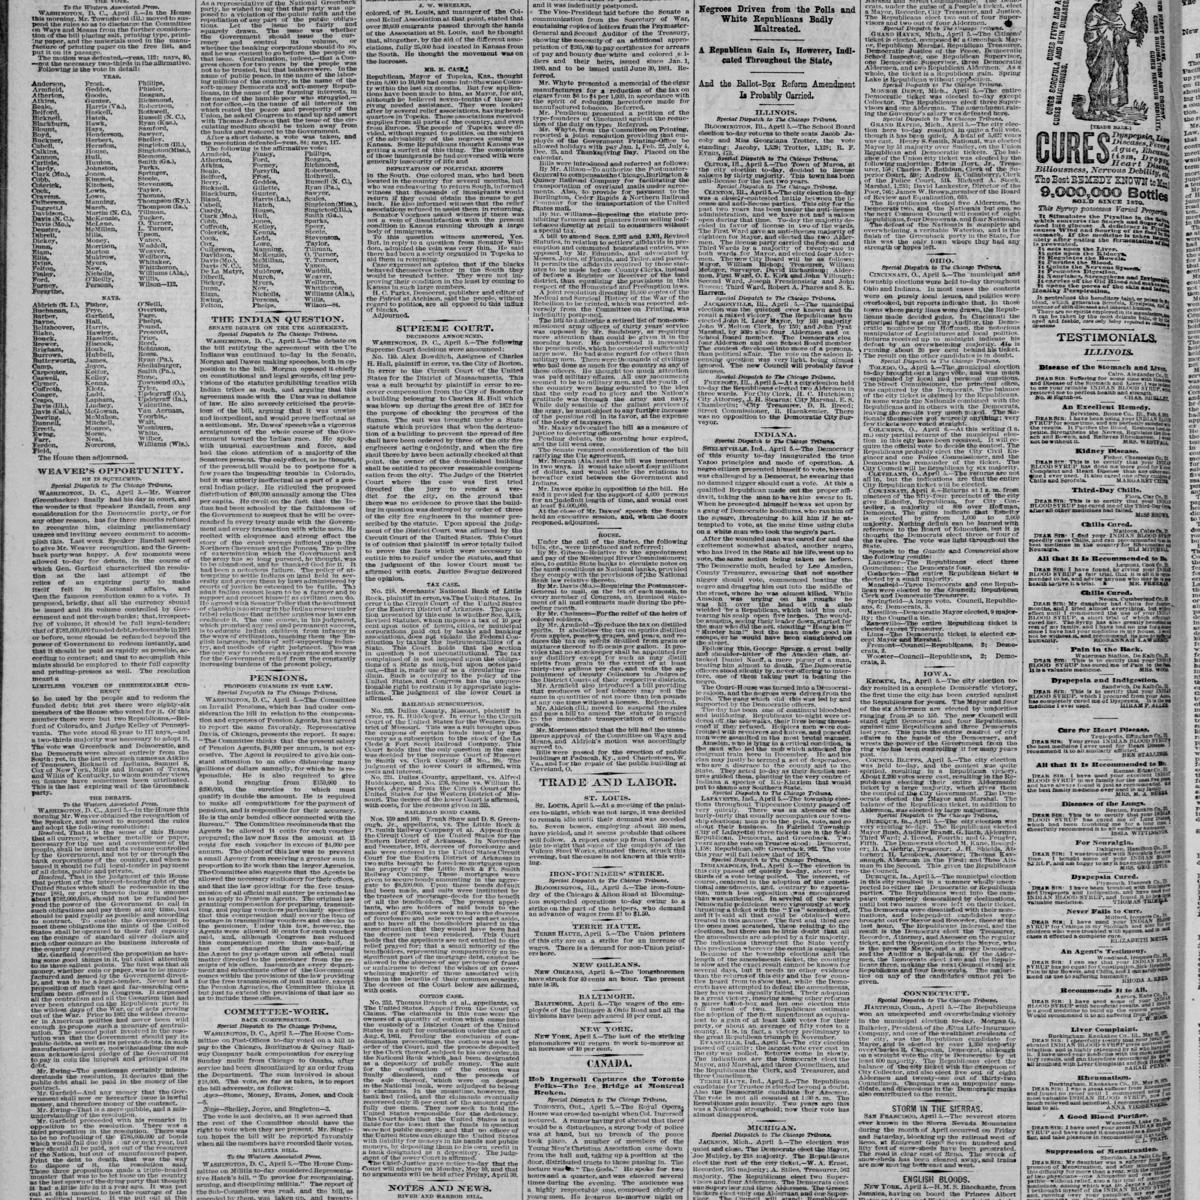 The Chicago Tribune, 1880-04-06, page 2